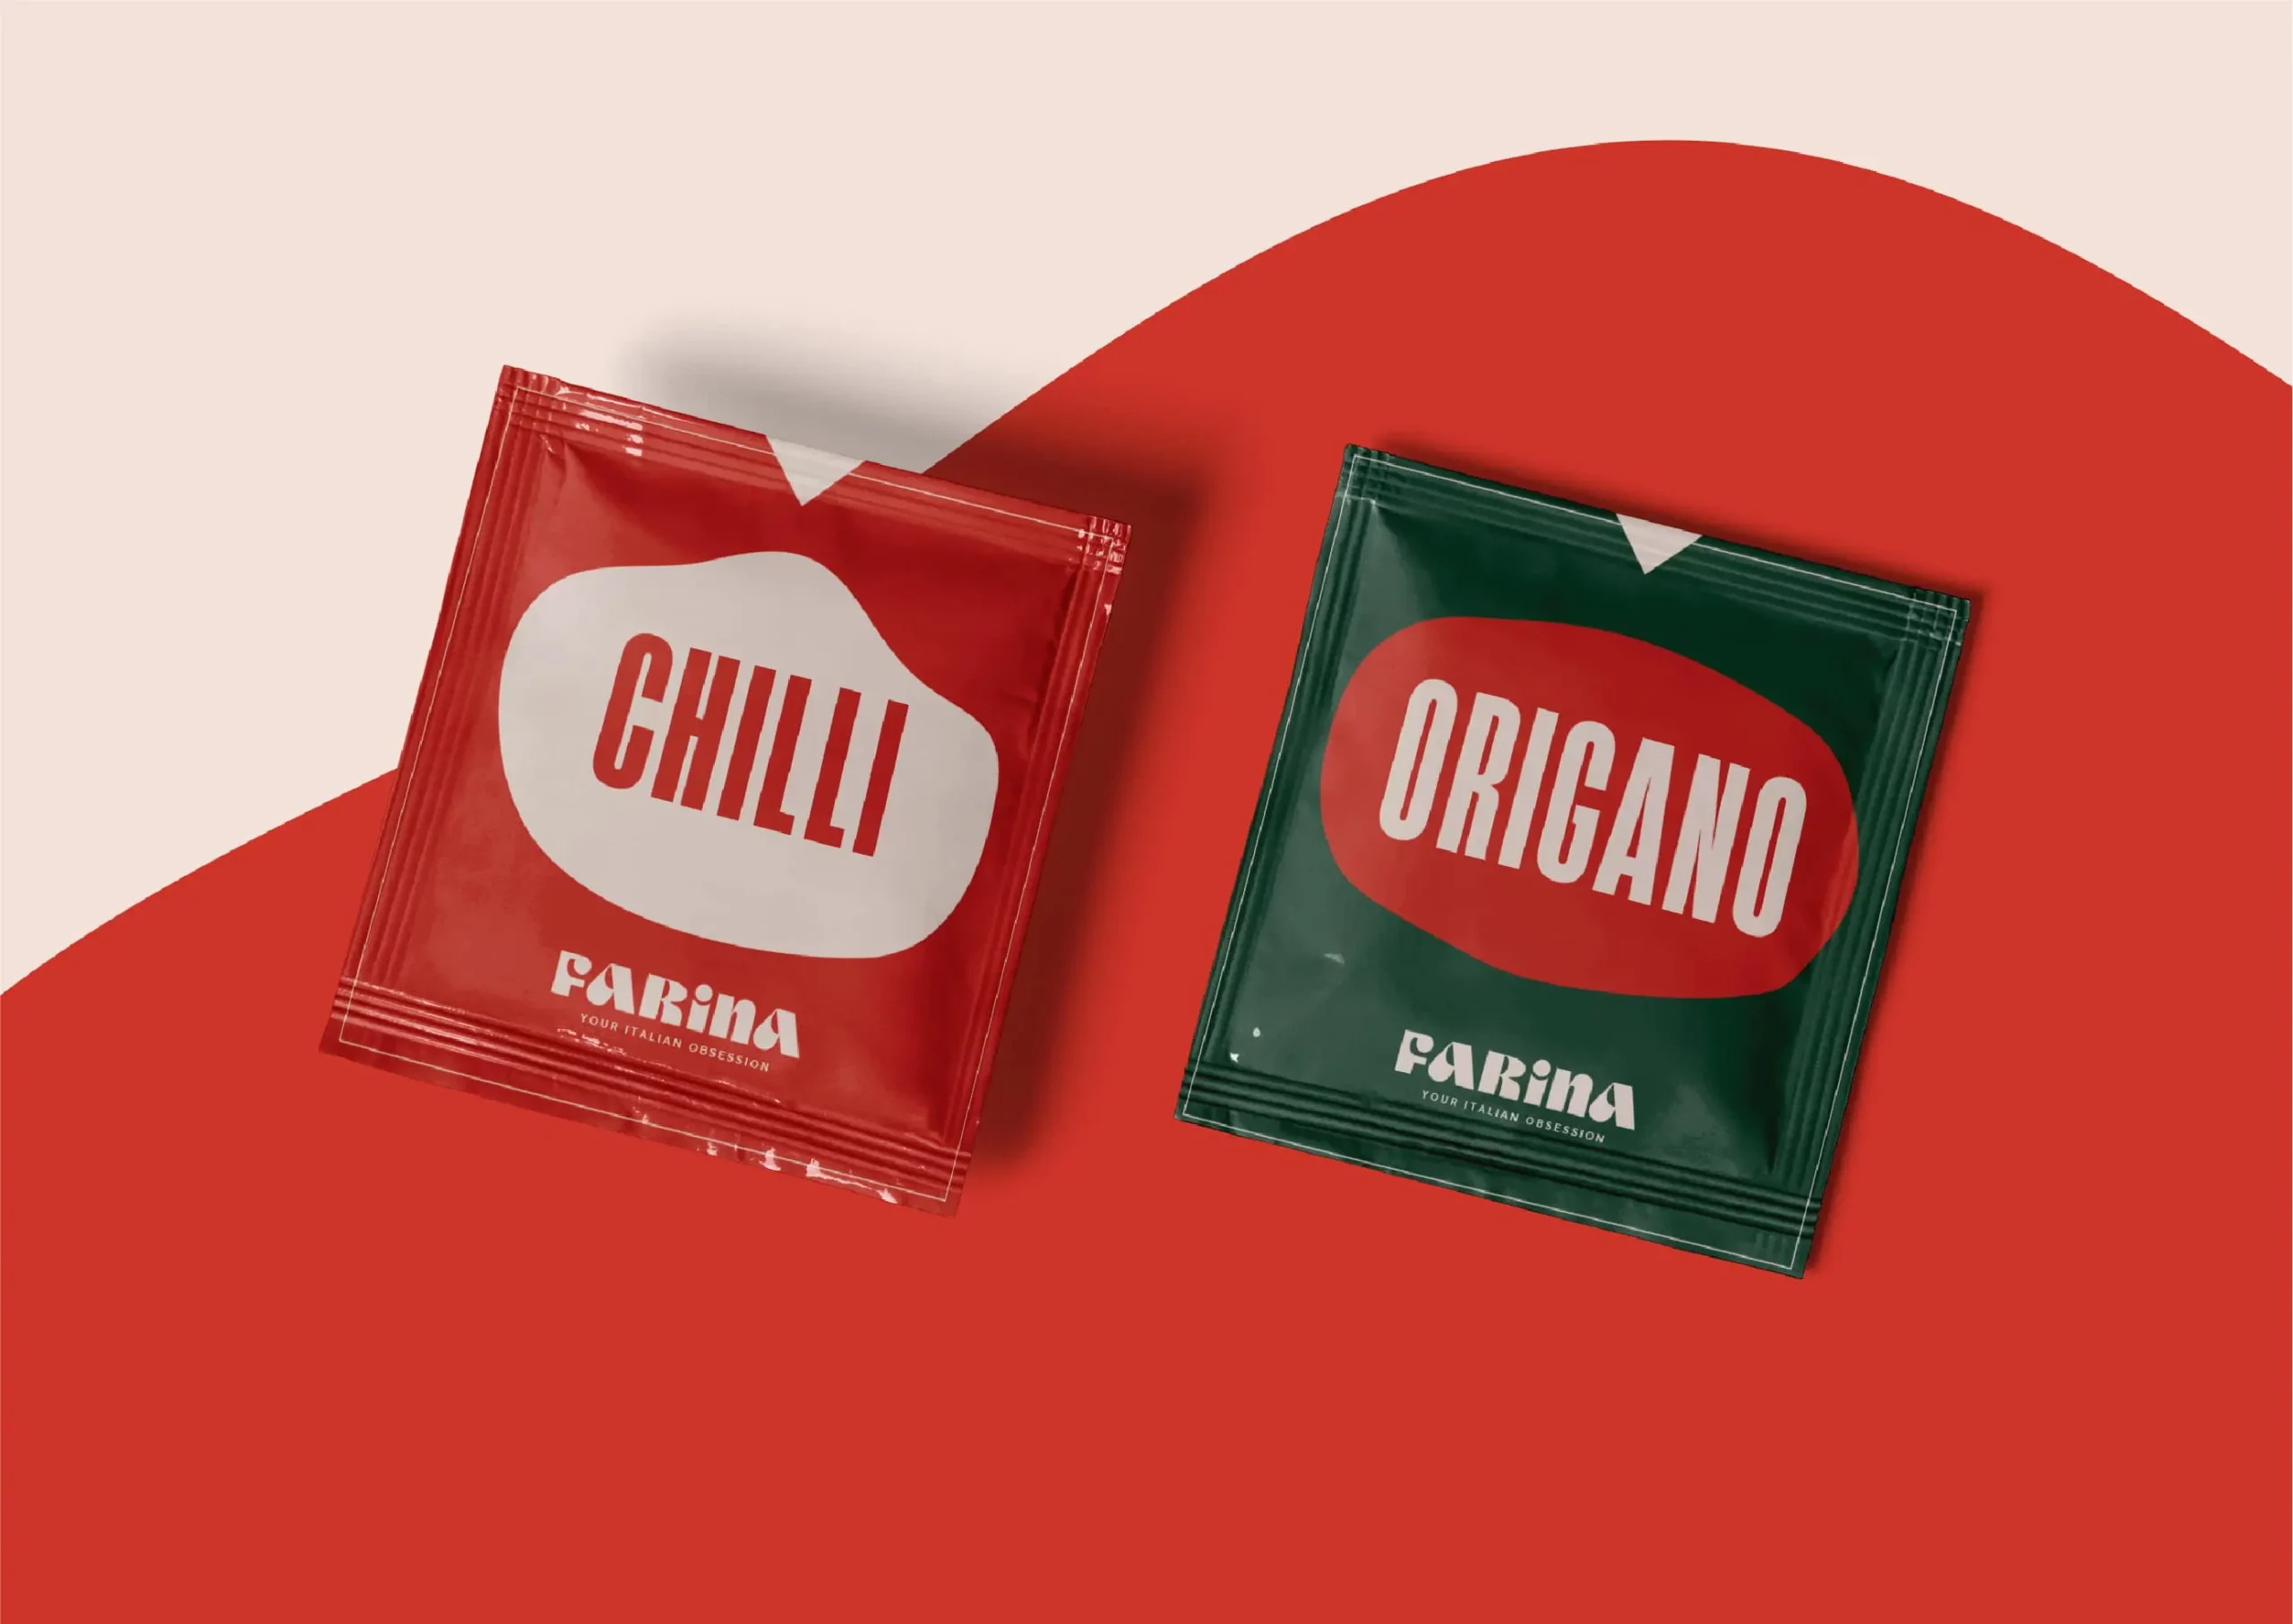 Two packets of chilli and oregano on a red background.